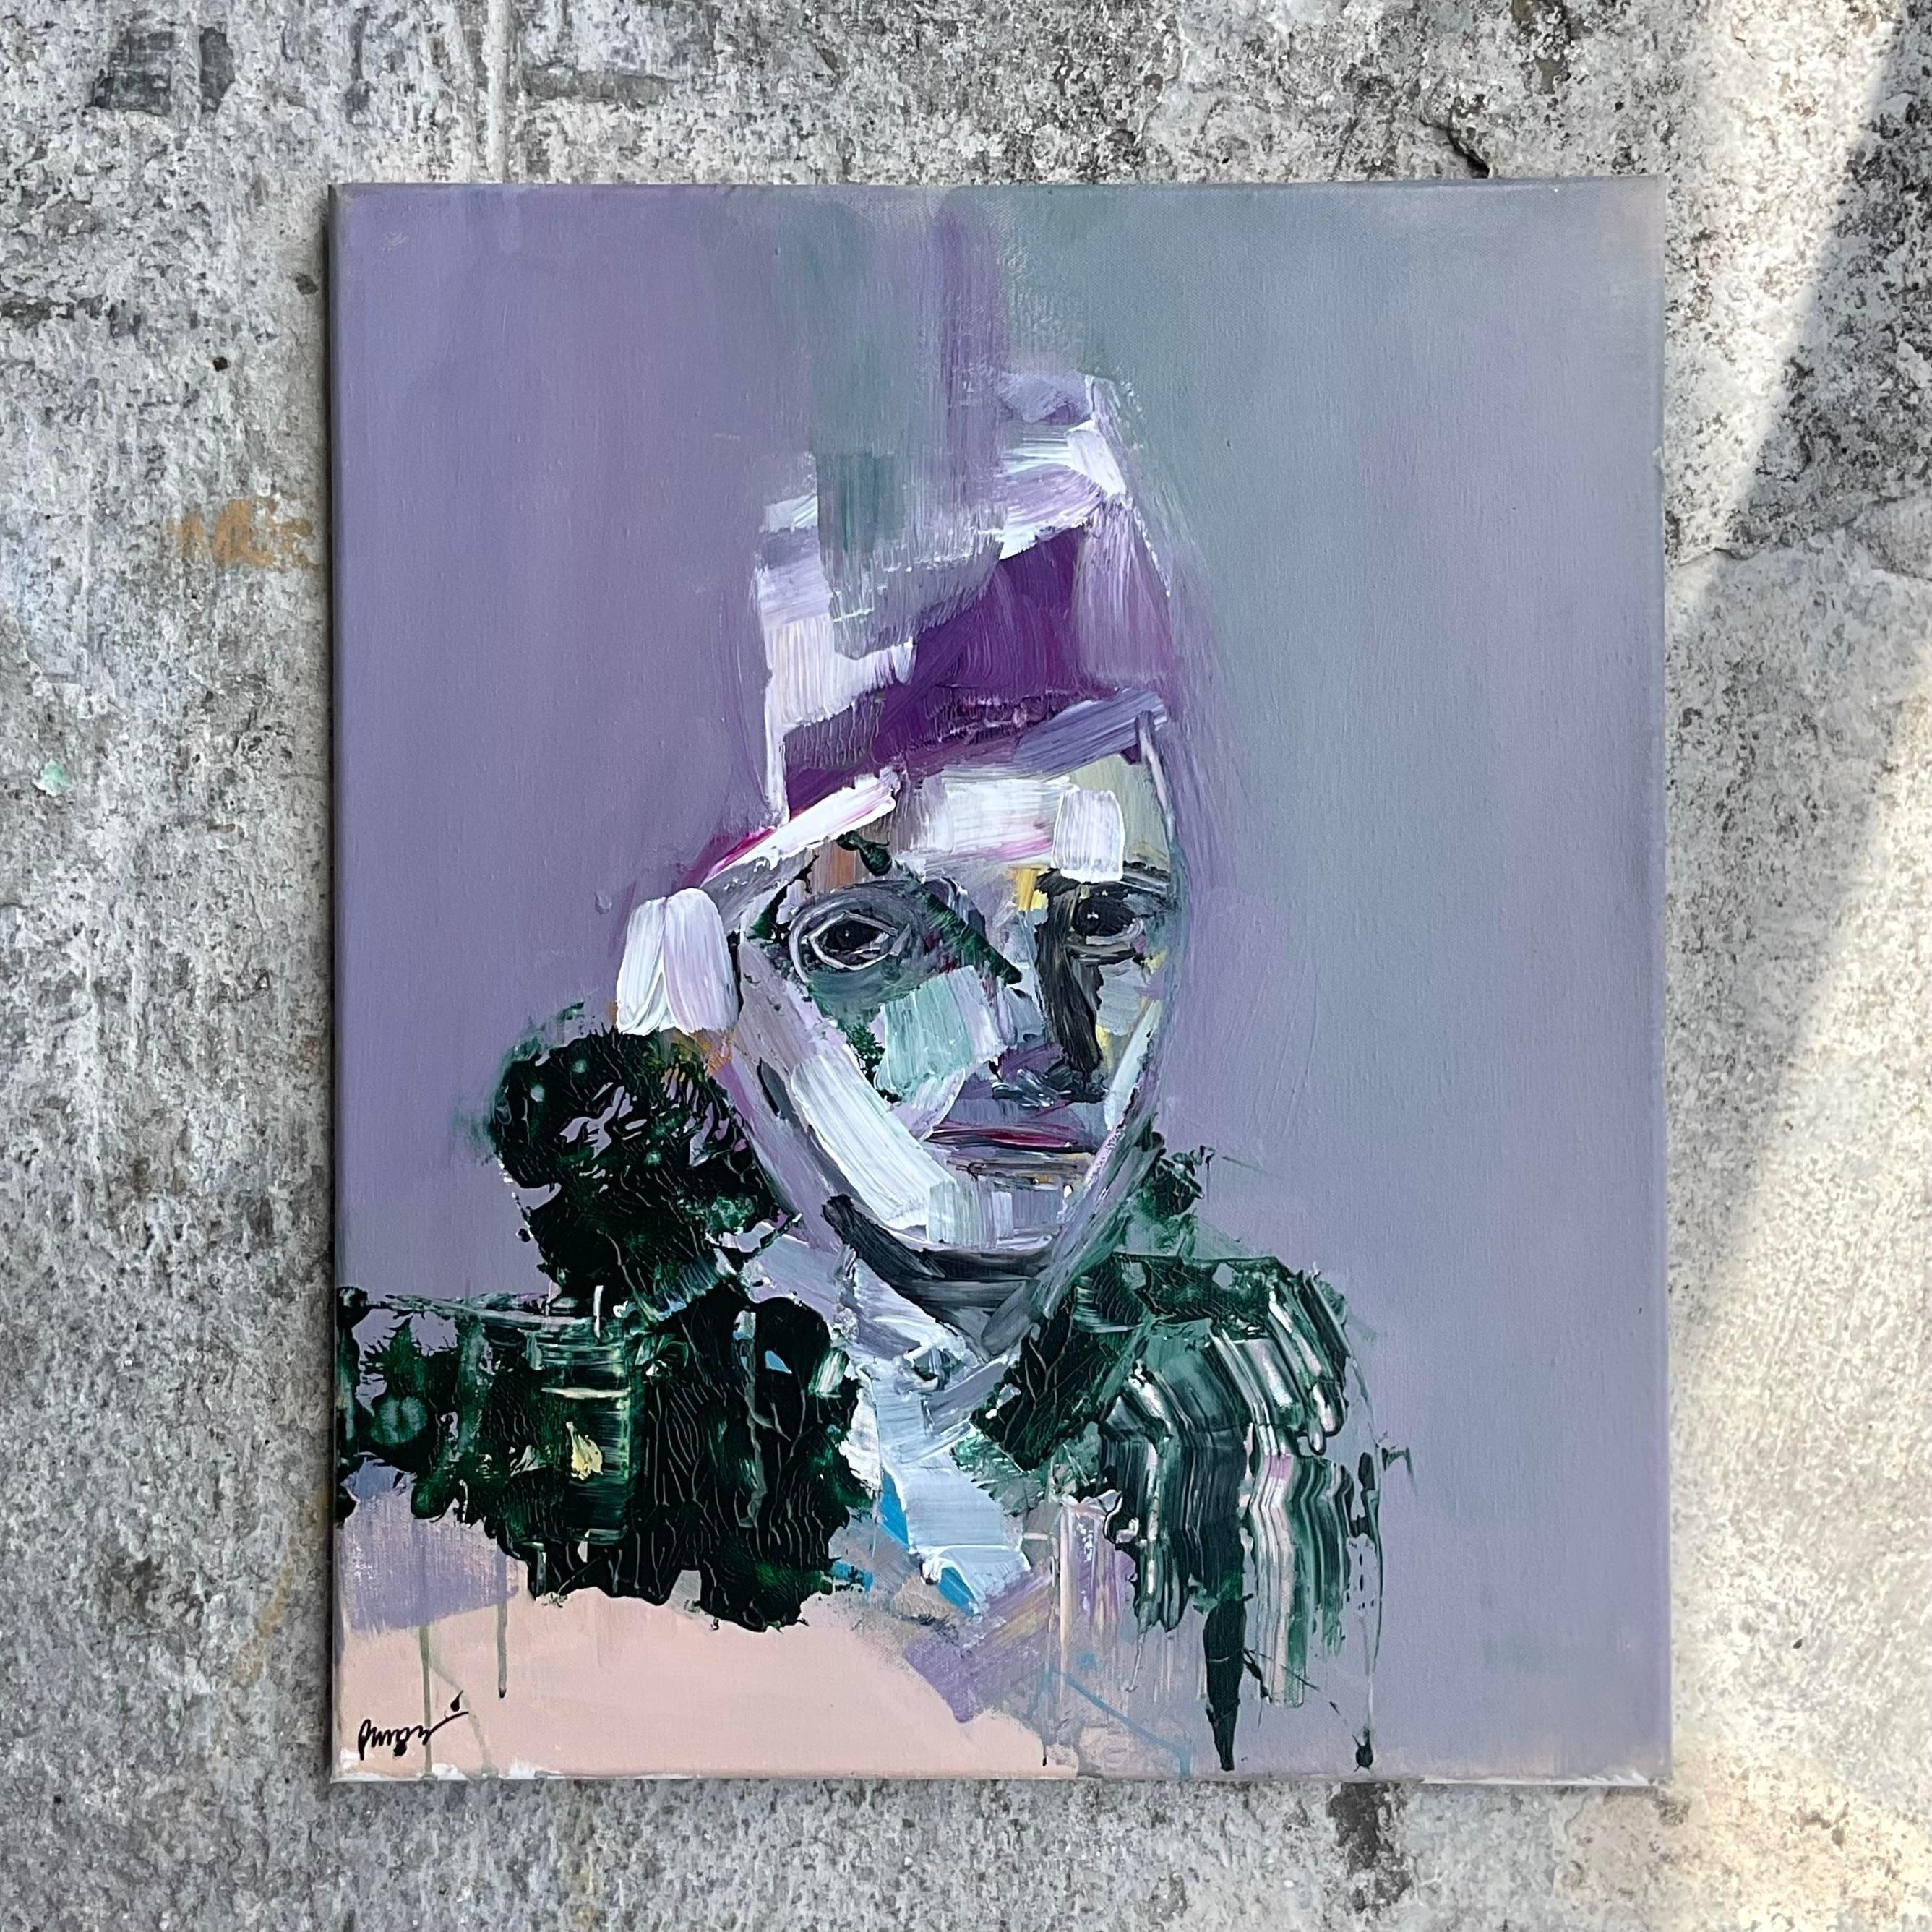 Infuse your space with the spirit of artistic freedom through our Vintage Boho Original Abstract Figurative Oil On Canvas. Crafted by American hands, this captivating piece embodies the rich diversity and creative energy of the nation. With its